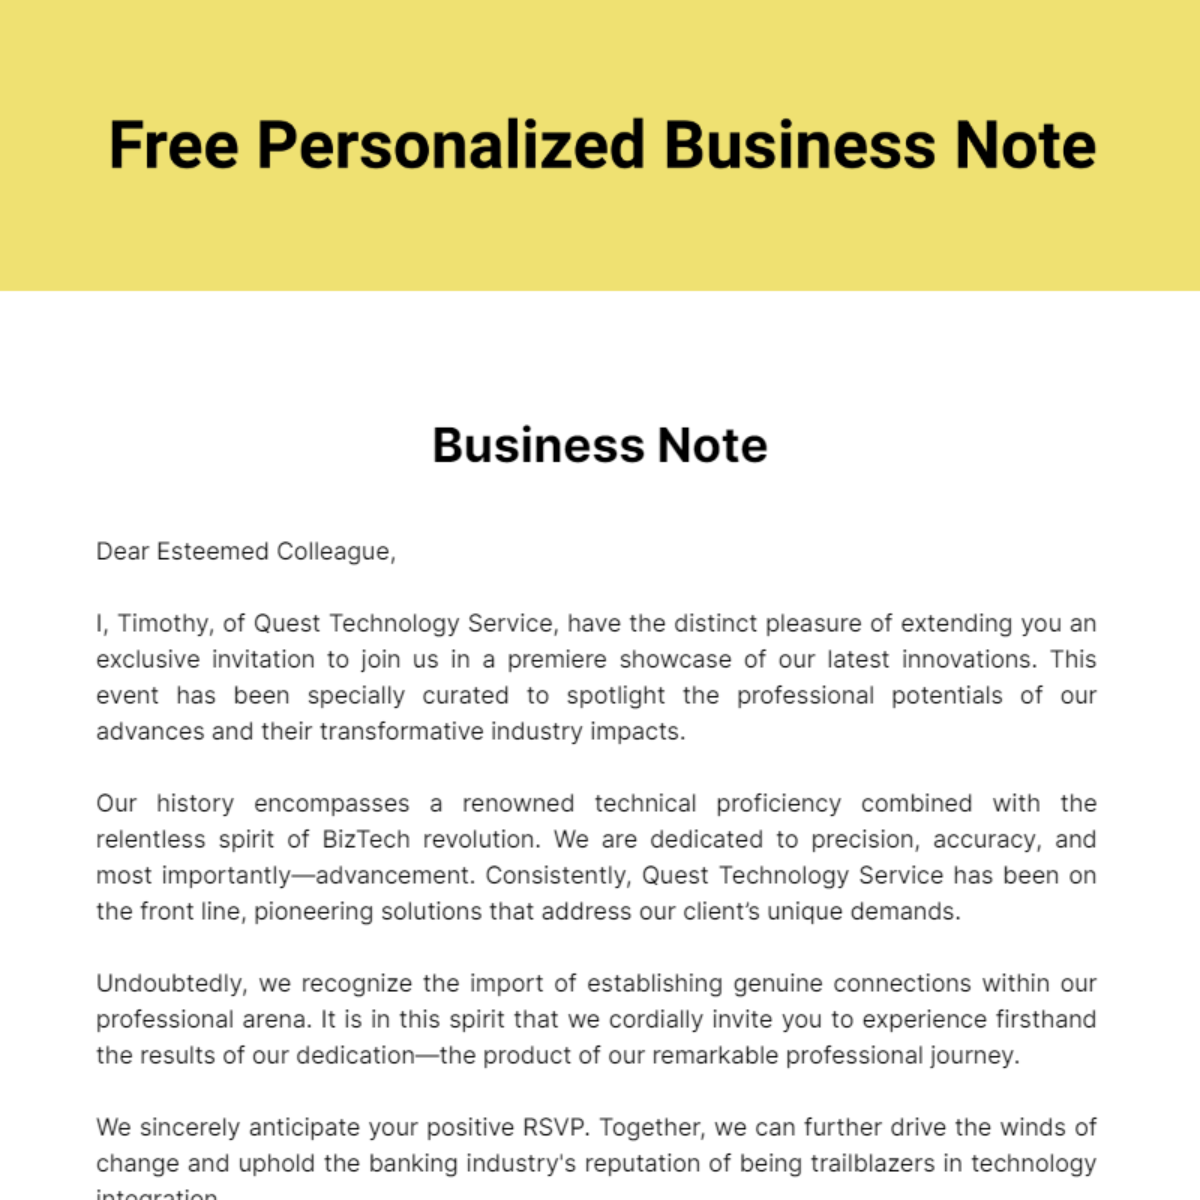 Free Personalized Business Note Template